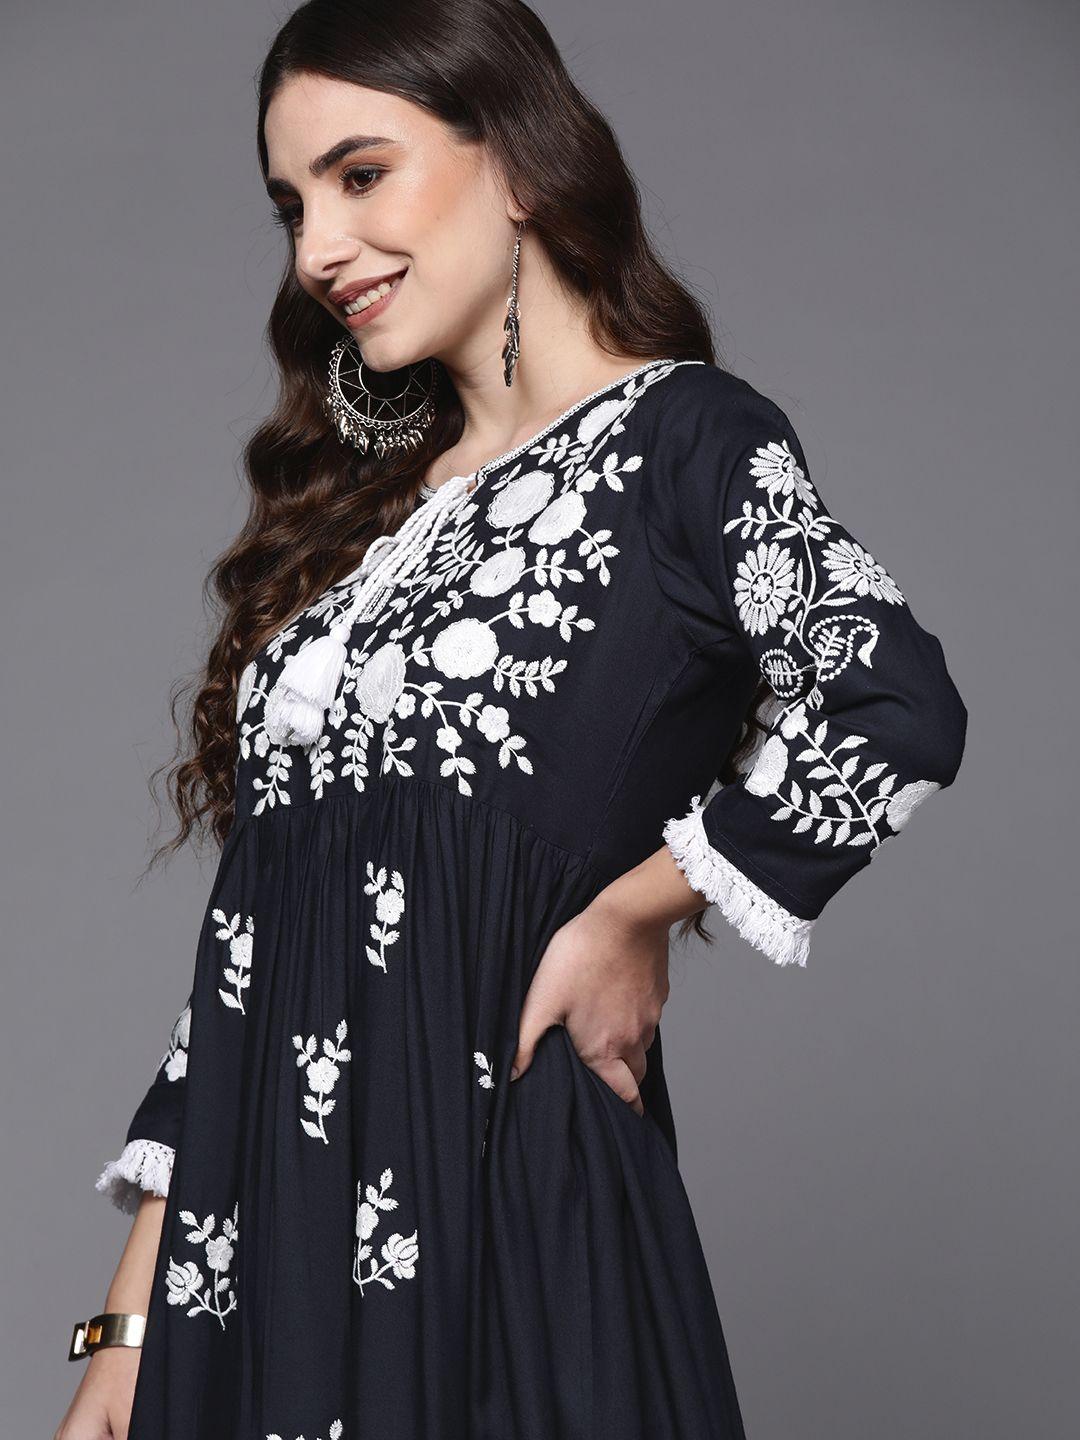 Indo Era Navy Blue & White Floral Embroidered Tie-Up Neck Ethnic A-Line Midi Dress